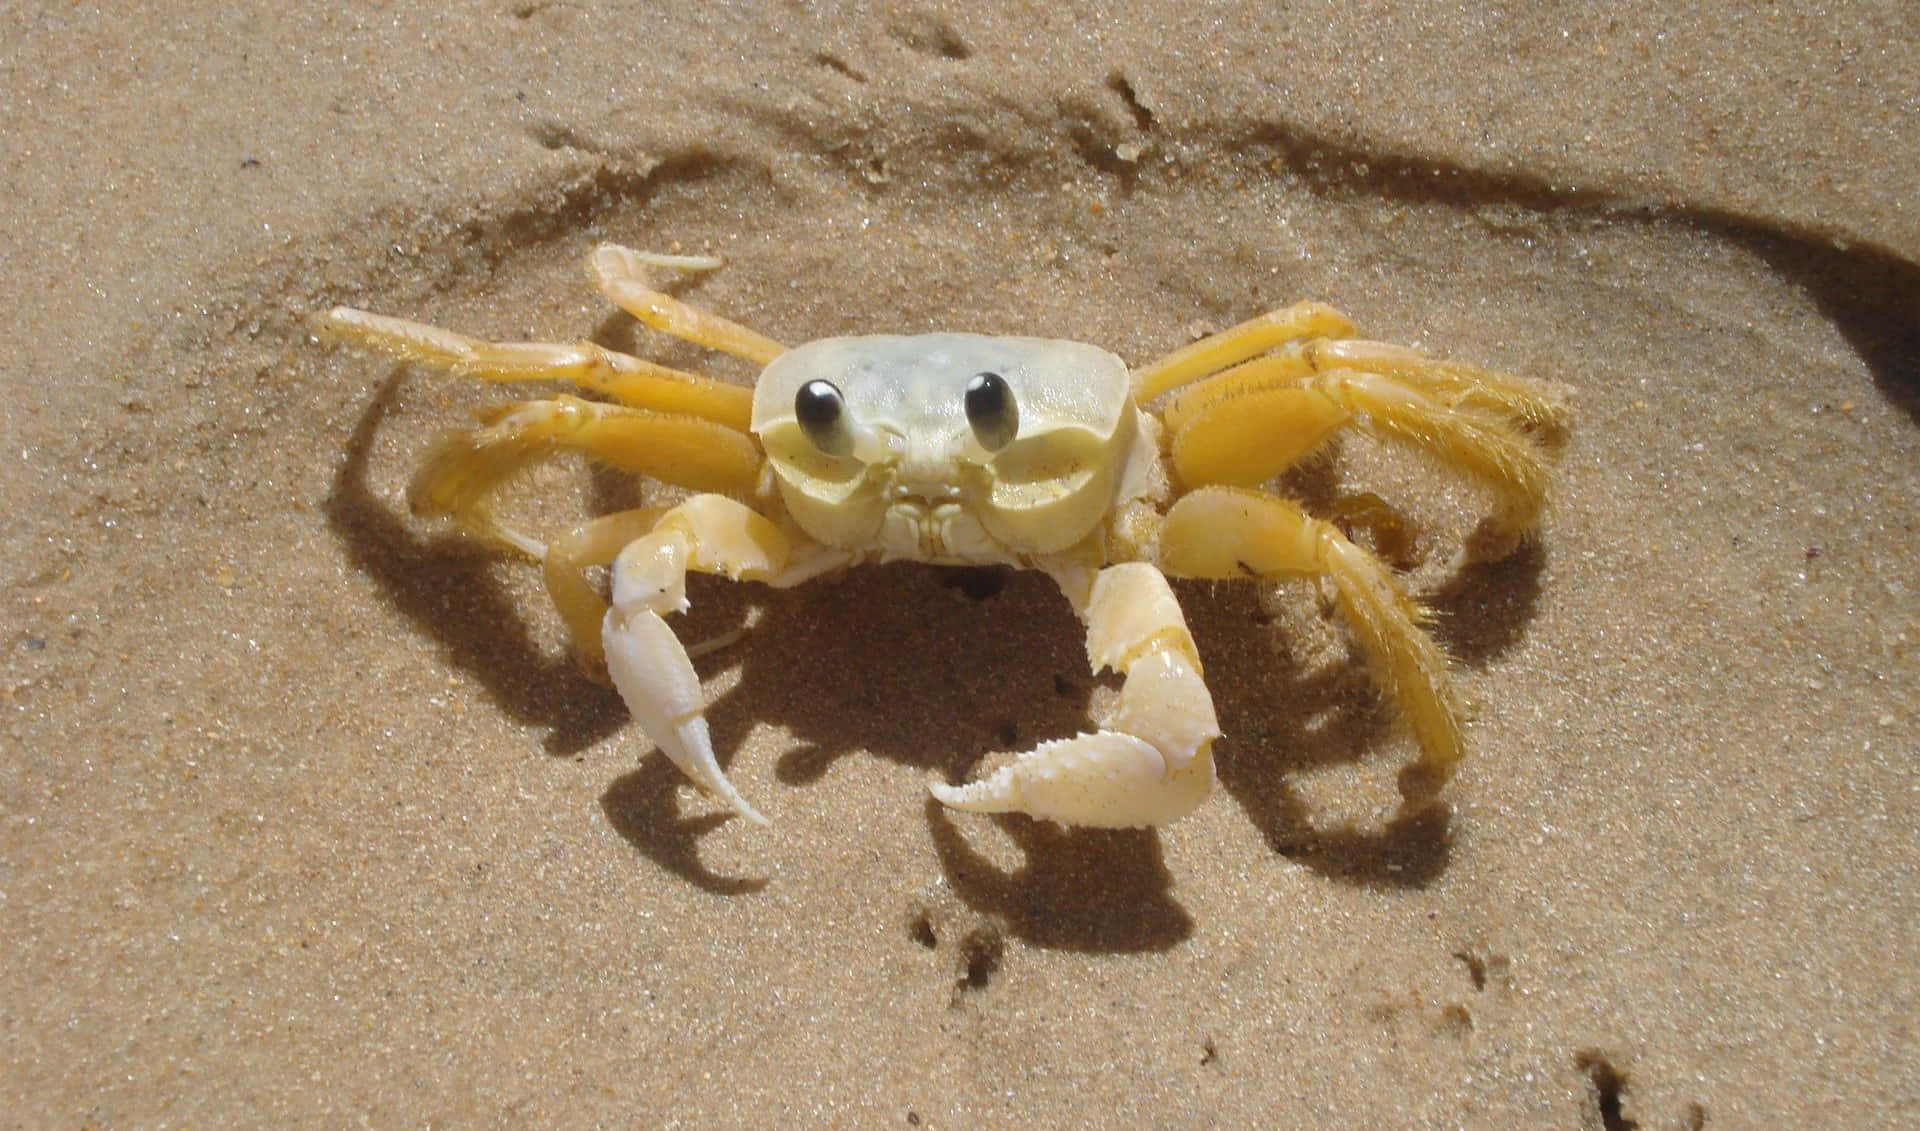 Nature's Elegance - A Red Blue Crab Crawling Along the Beach